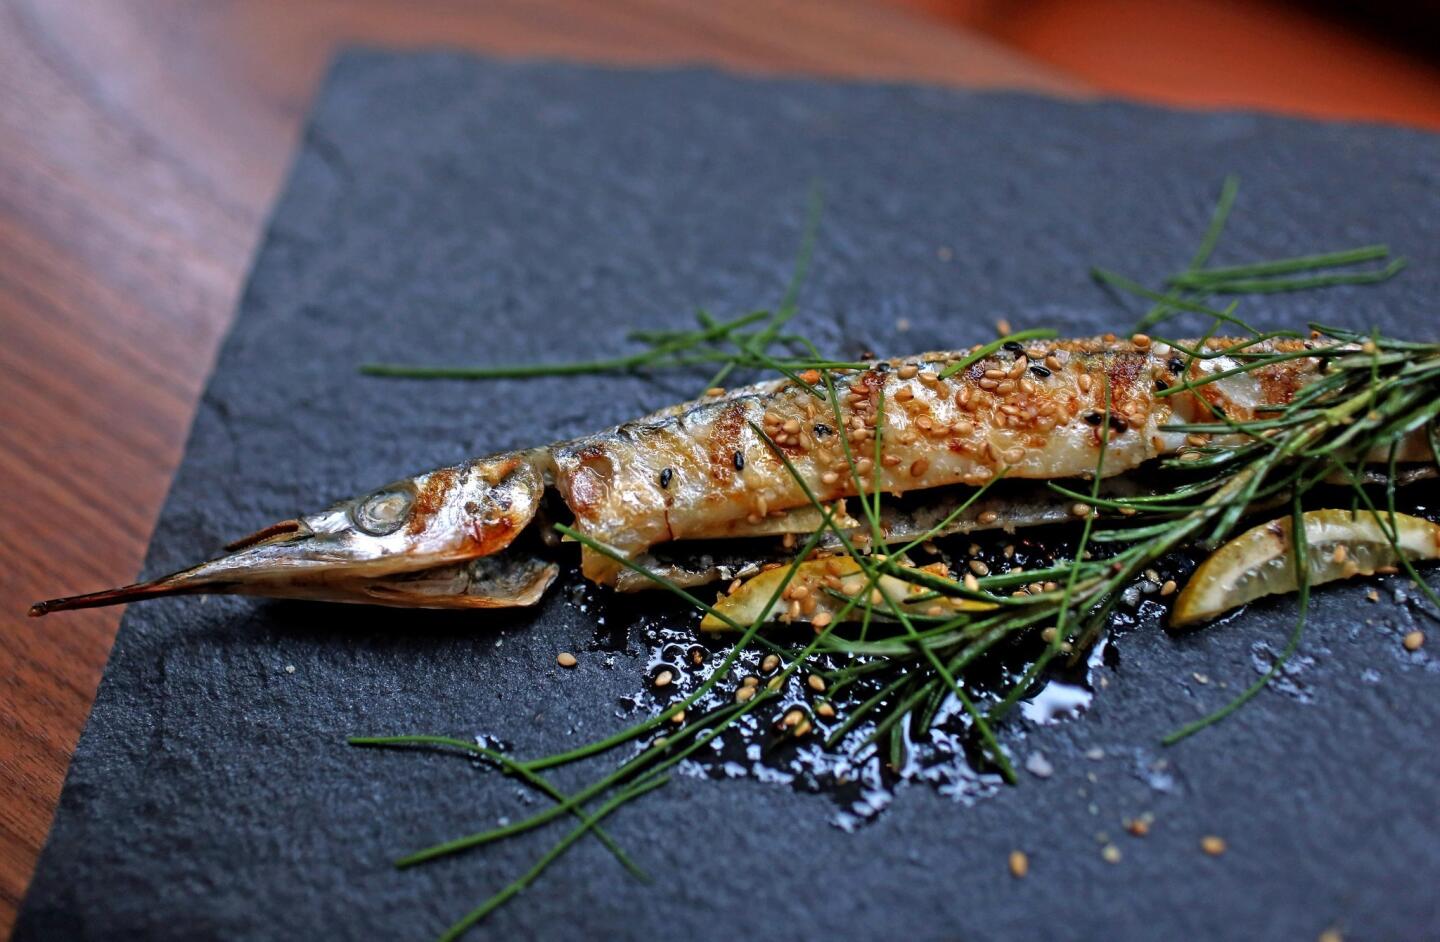 Grilled needlefish is stuffed with rosemary sprigs from Orsa & Winston in downtown L.A.